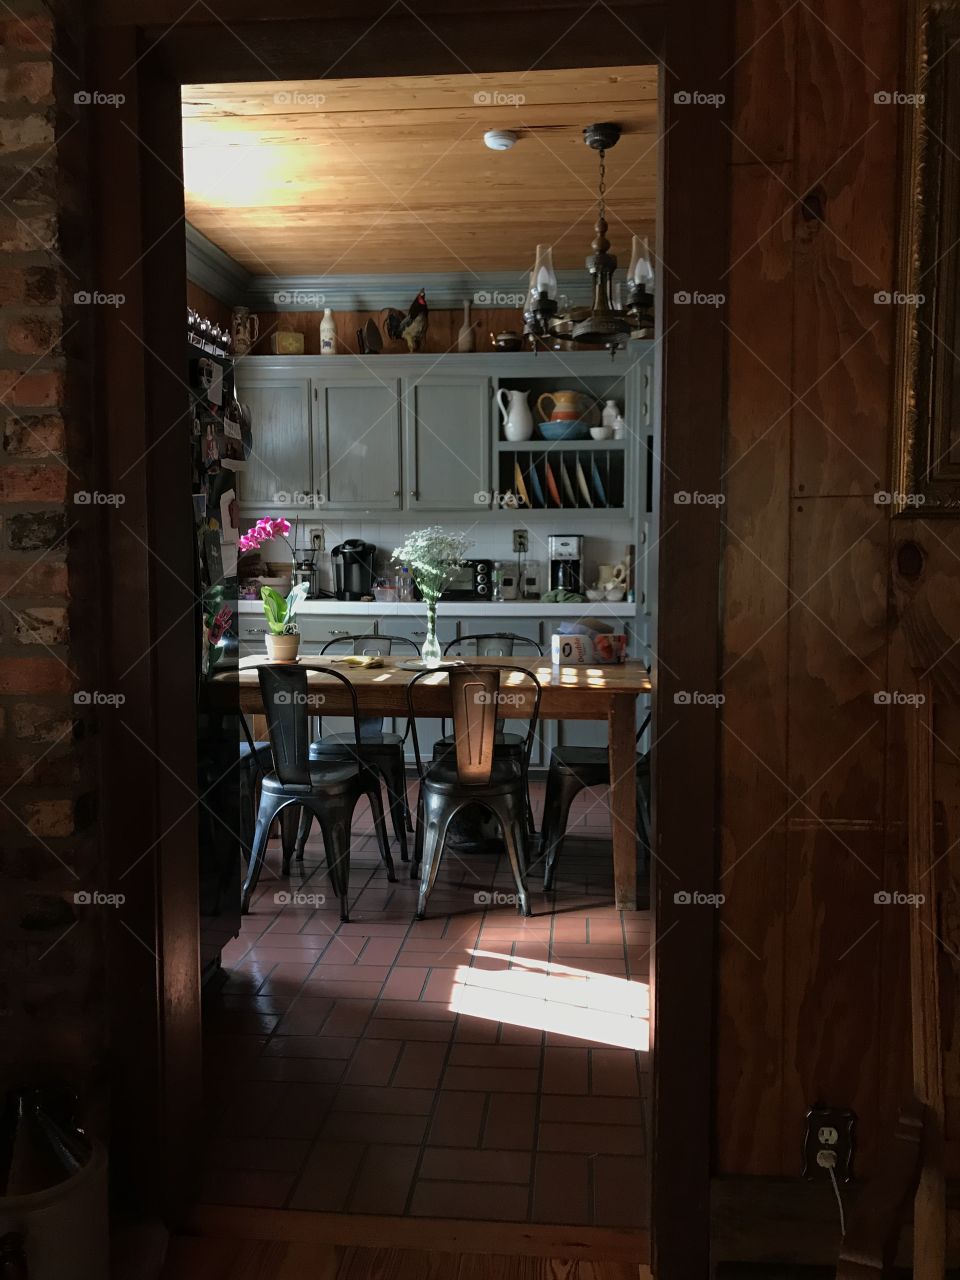 A kitchen. Cozy and homey, brick floors and grey wooden cabinets, flowers on the table, and light pouring through the open window. 